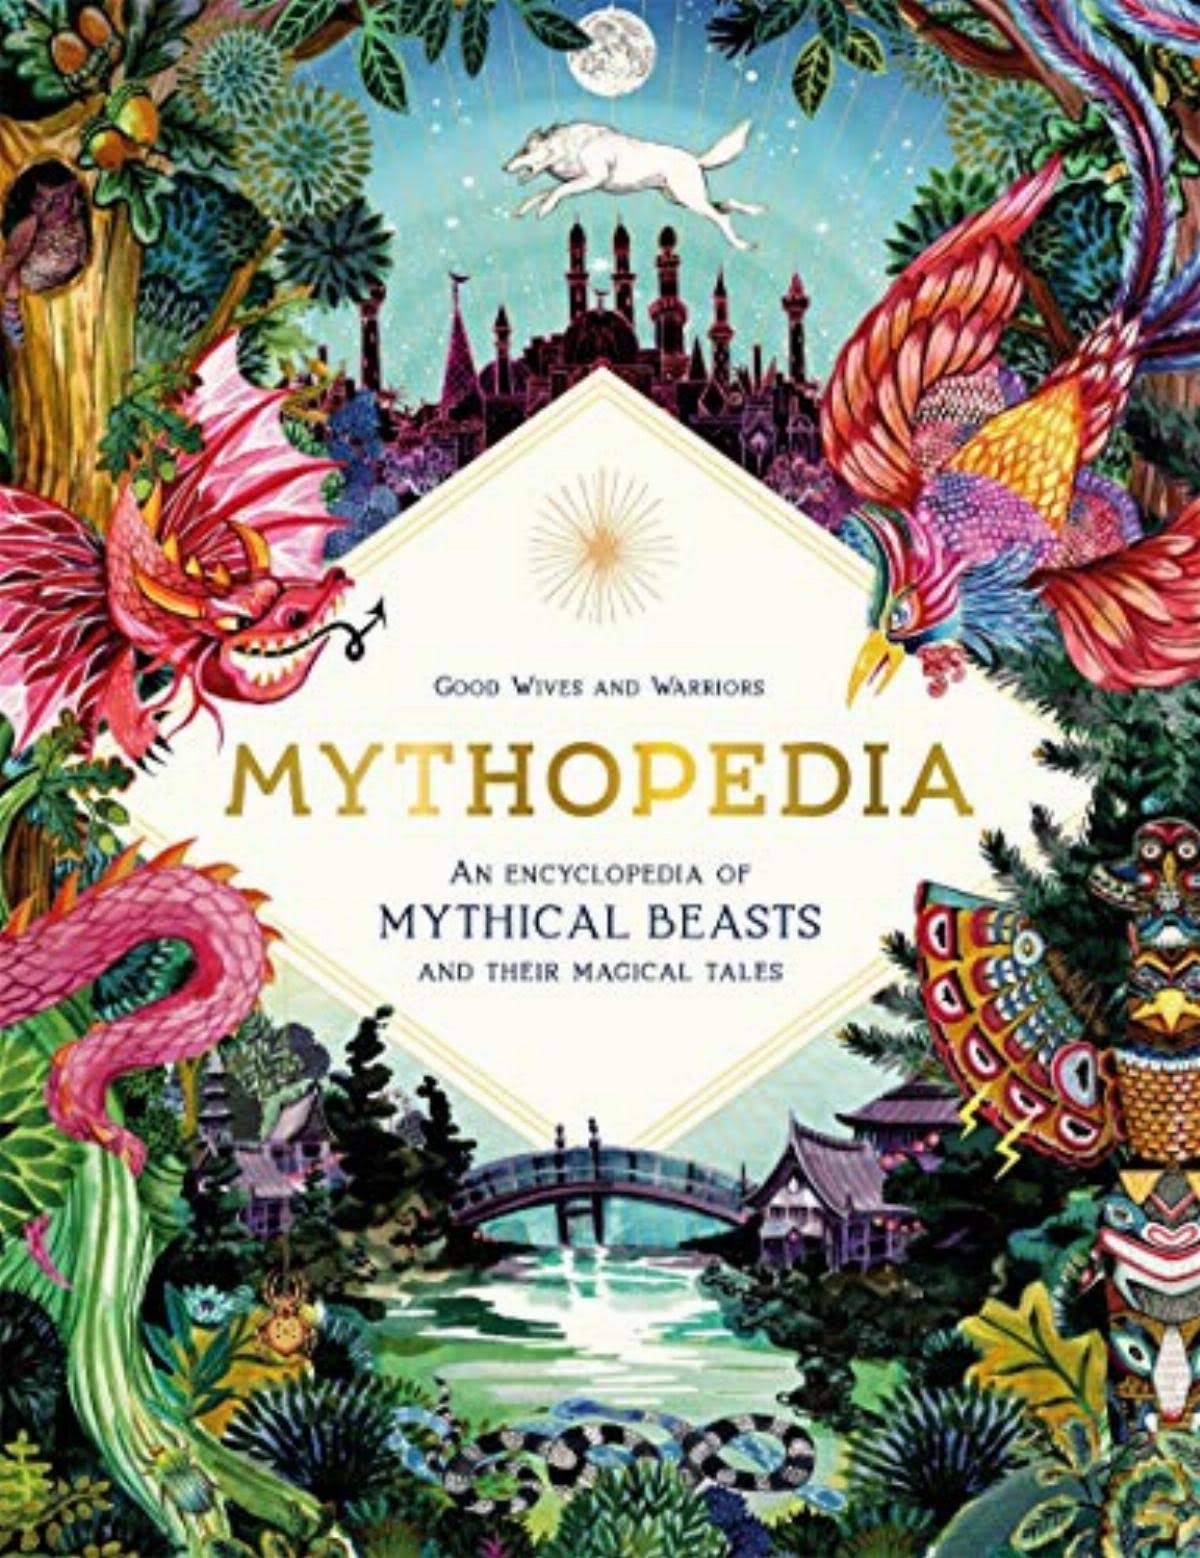 Mythopedia: An Encyclopedia of Mythical Beasts and Their Magical Tales [Book]